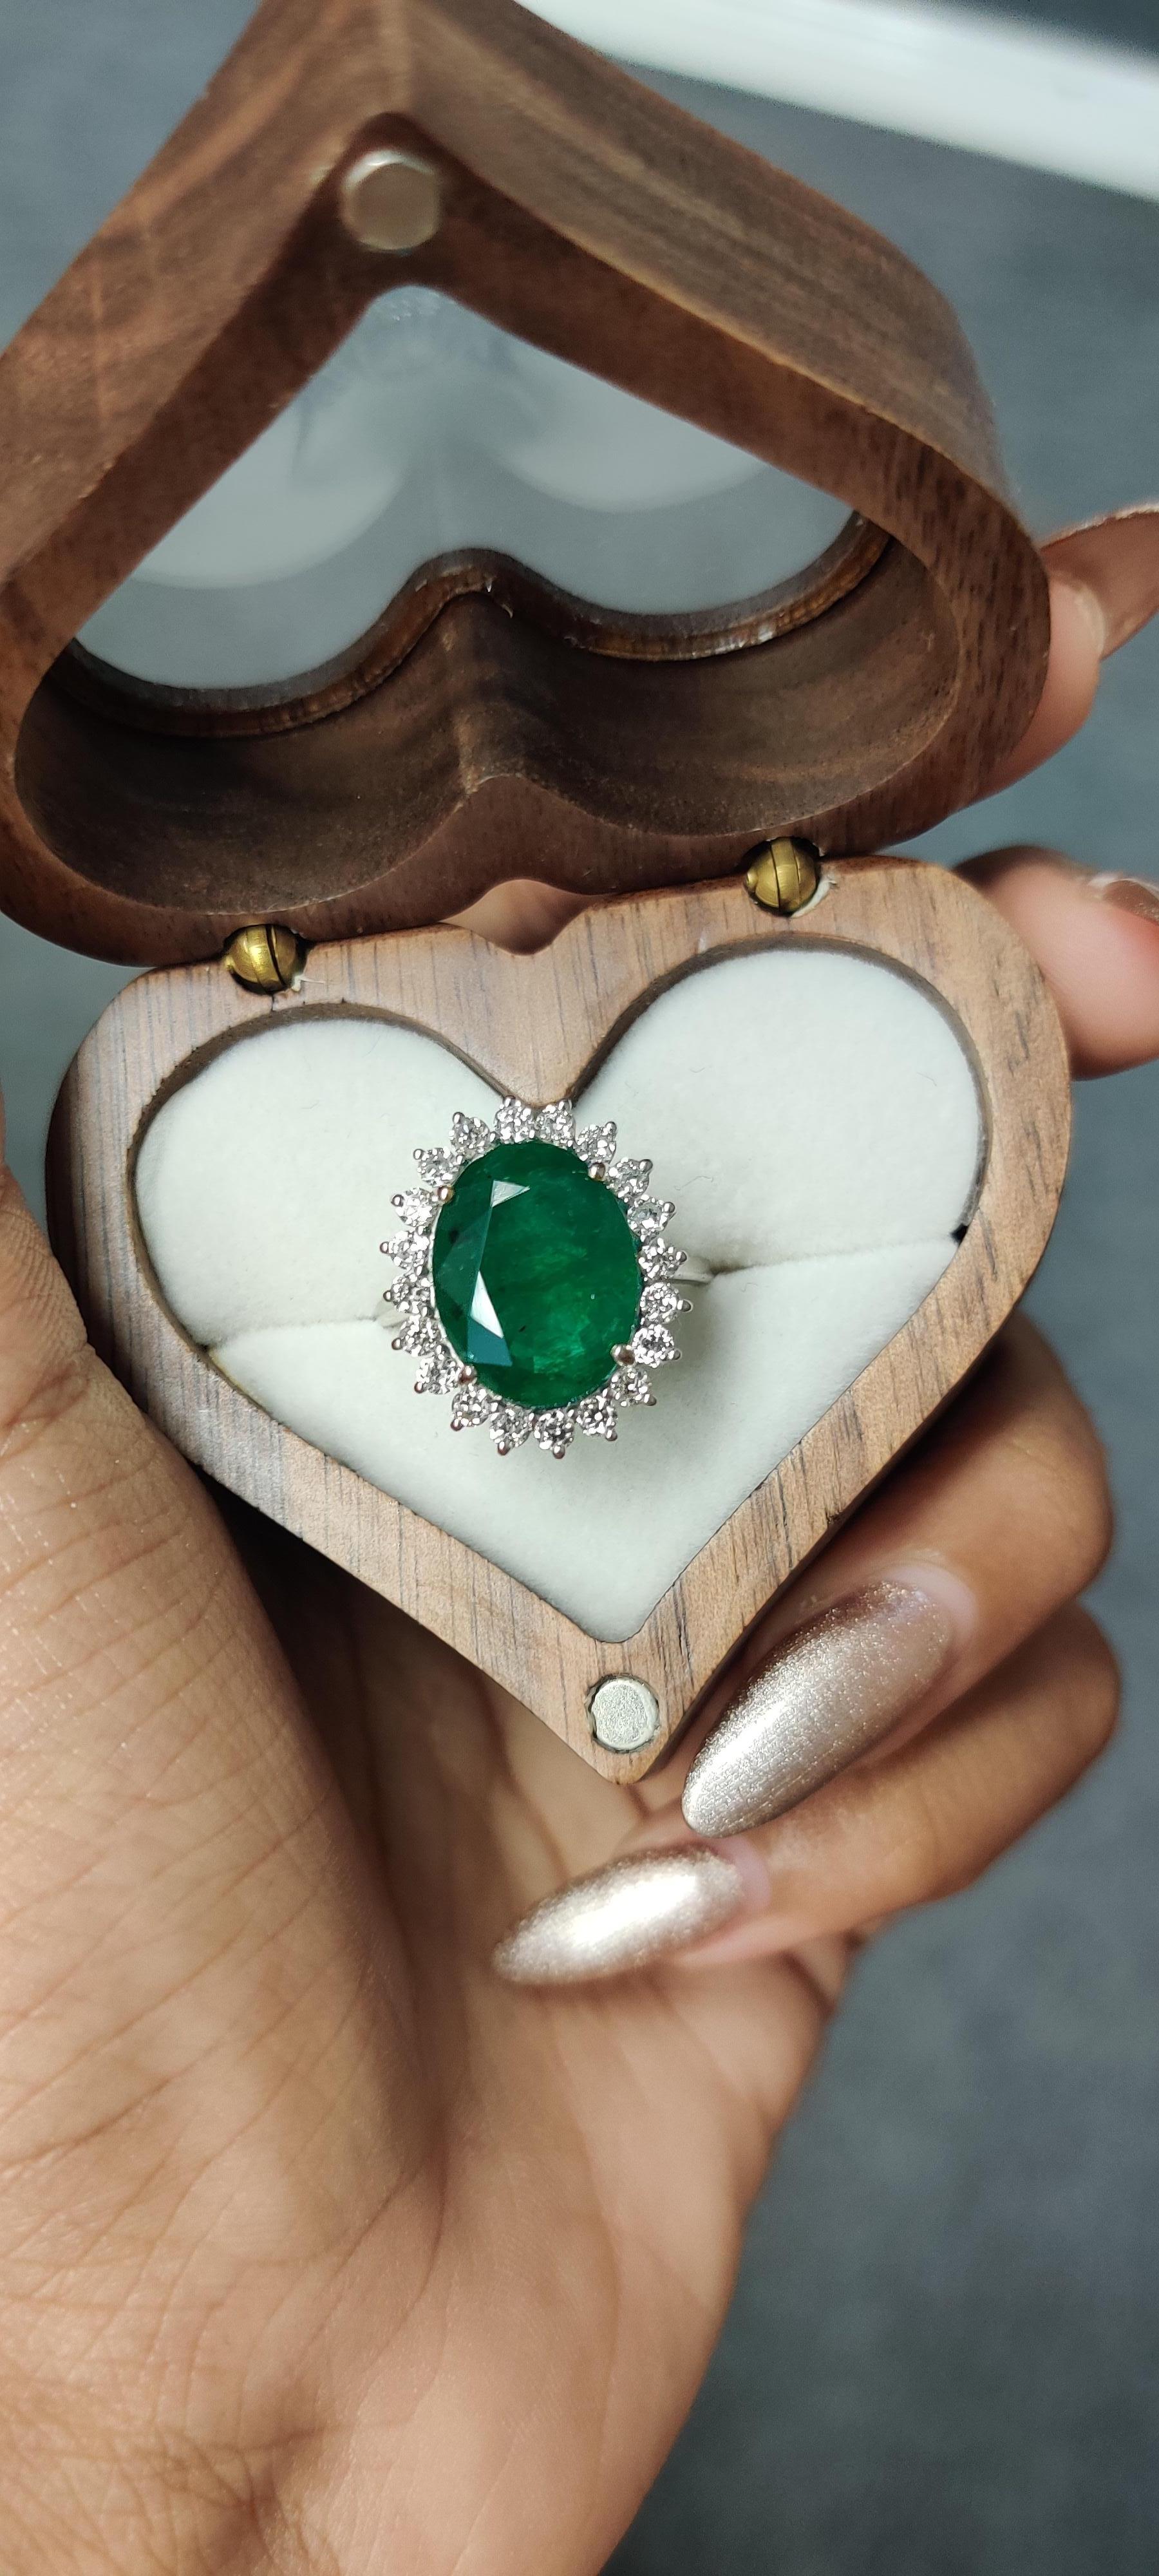 Christmas Special 7.11 Carat Zambian Emerald Ring with Old Cut Diamonds 4